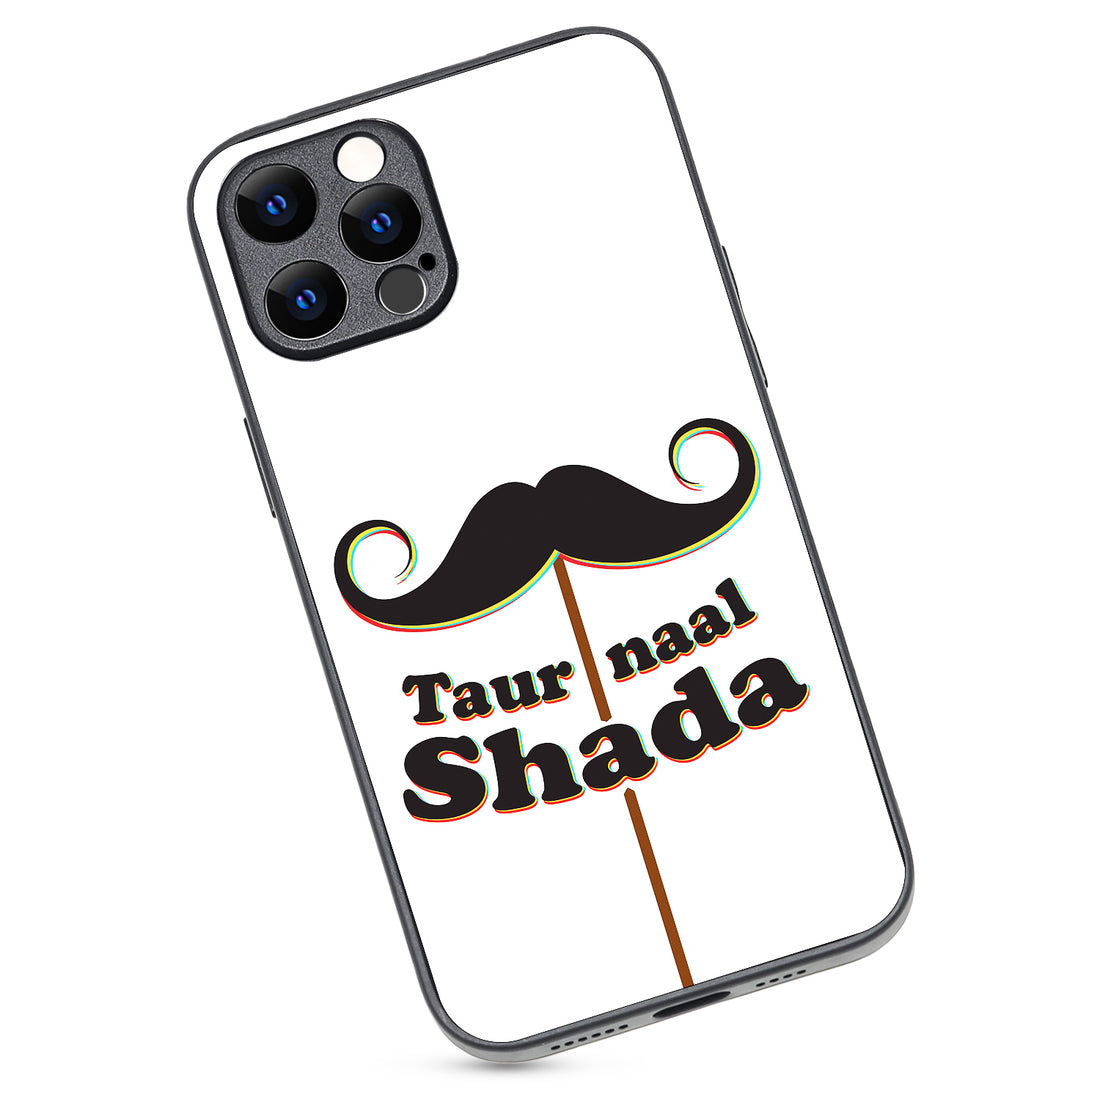 Taur Naal Shada Motivational Quotes iPhone 12 Pro Max Case